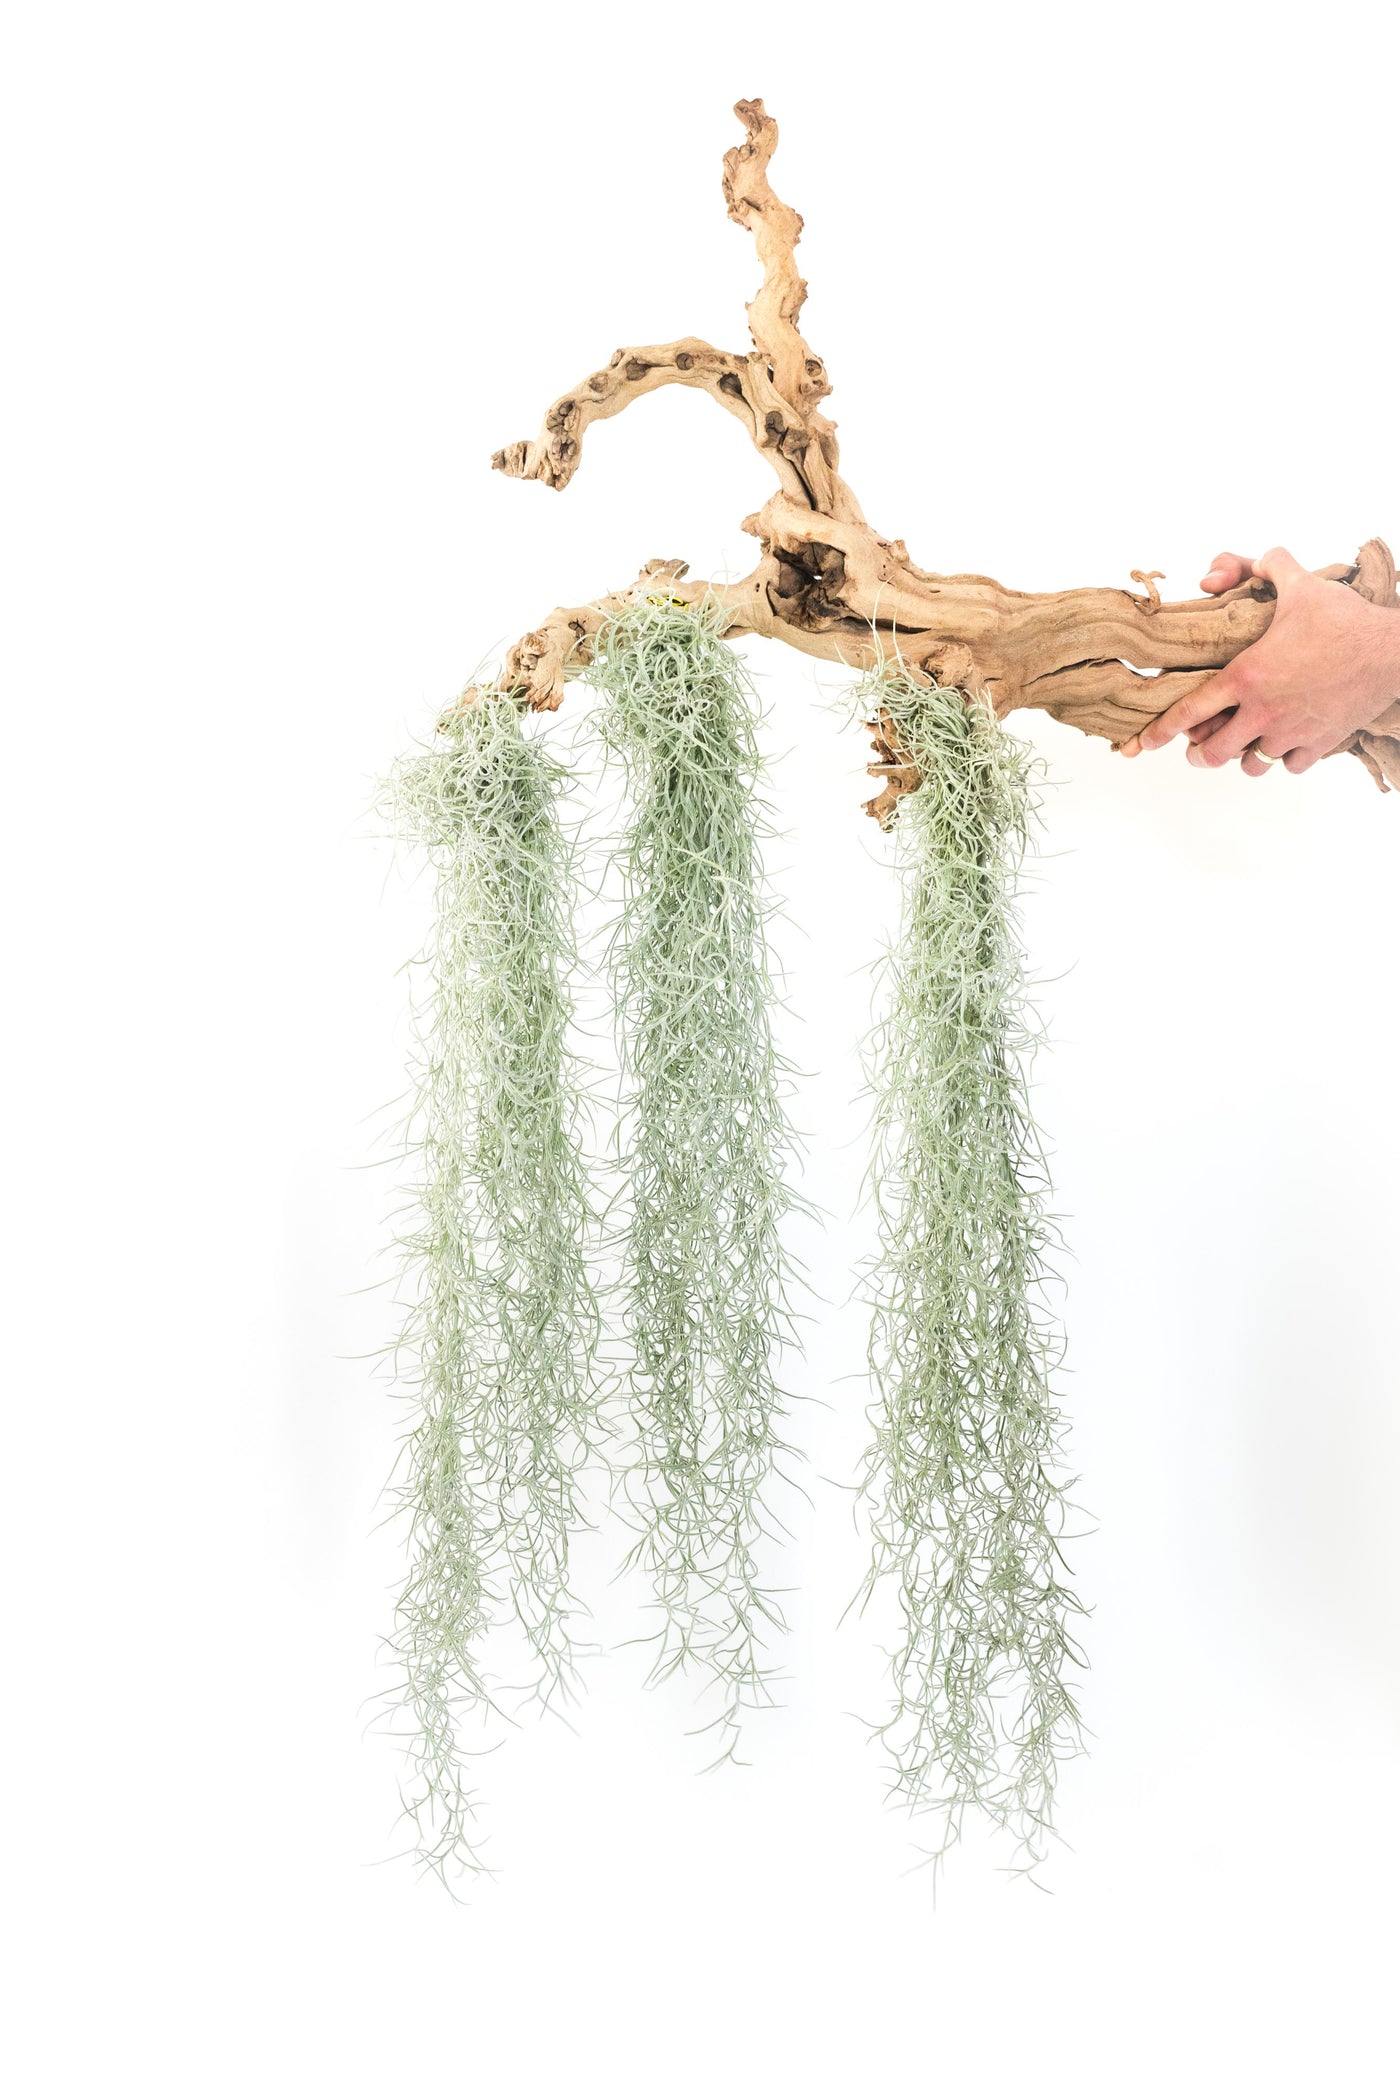 What is Spanish moss? Where did it come from & what is it for